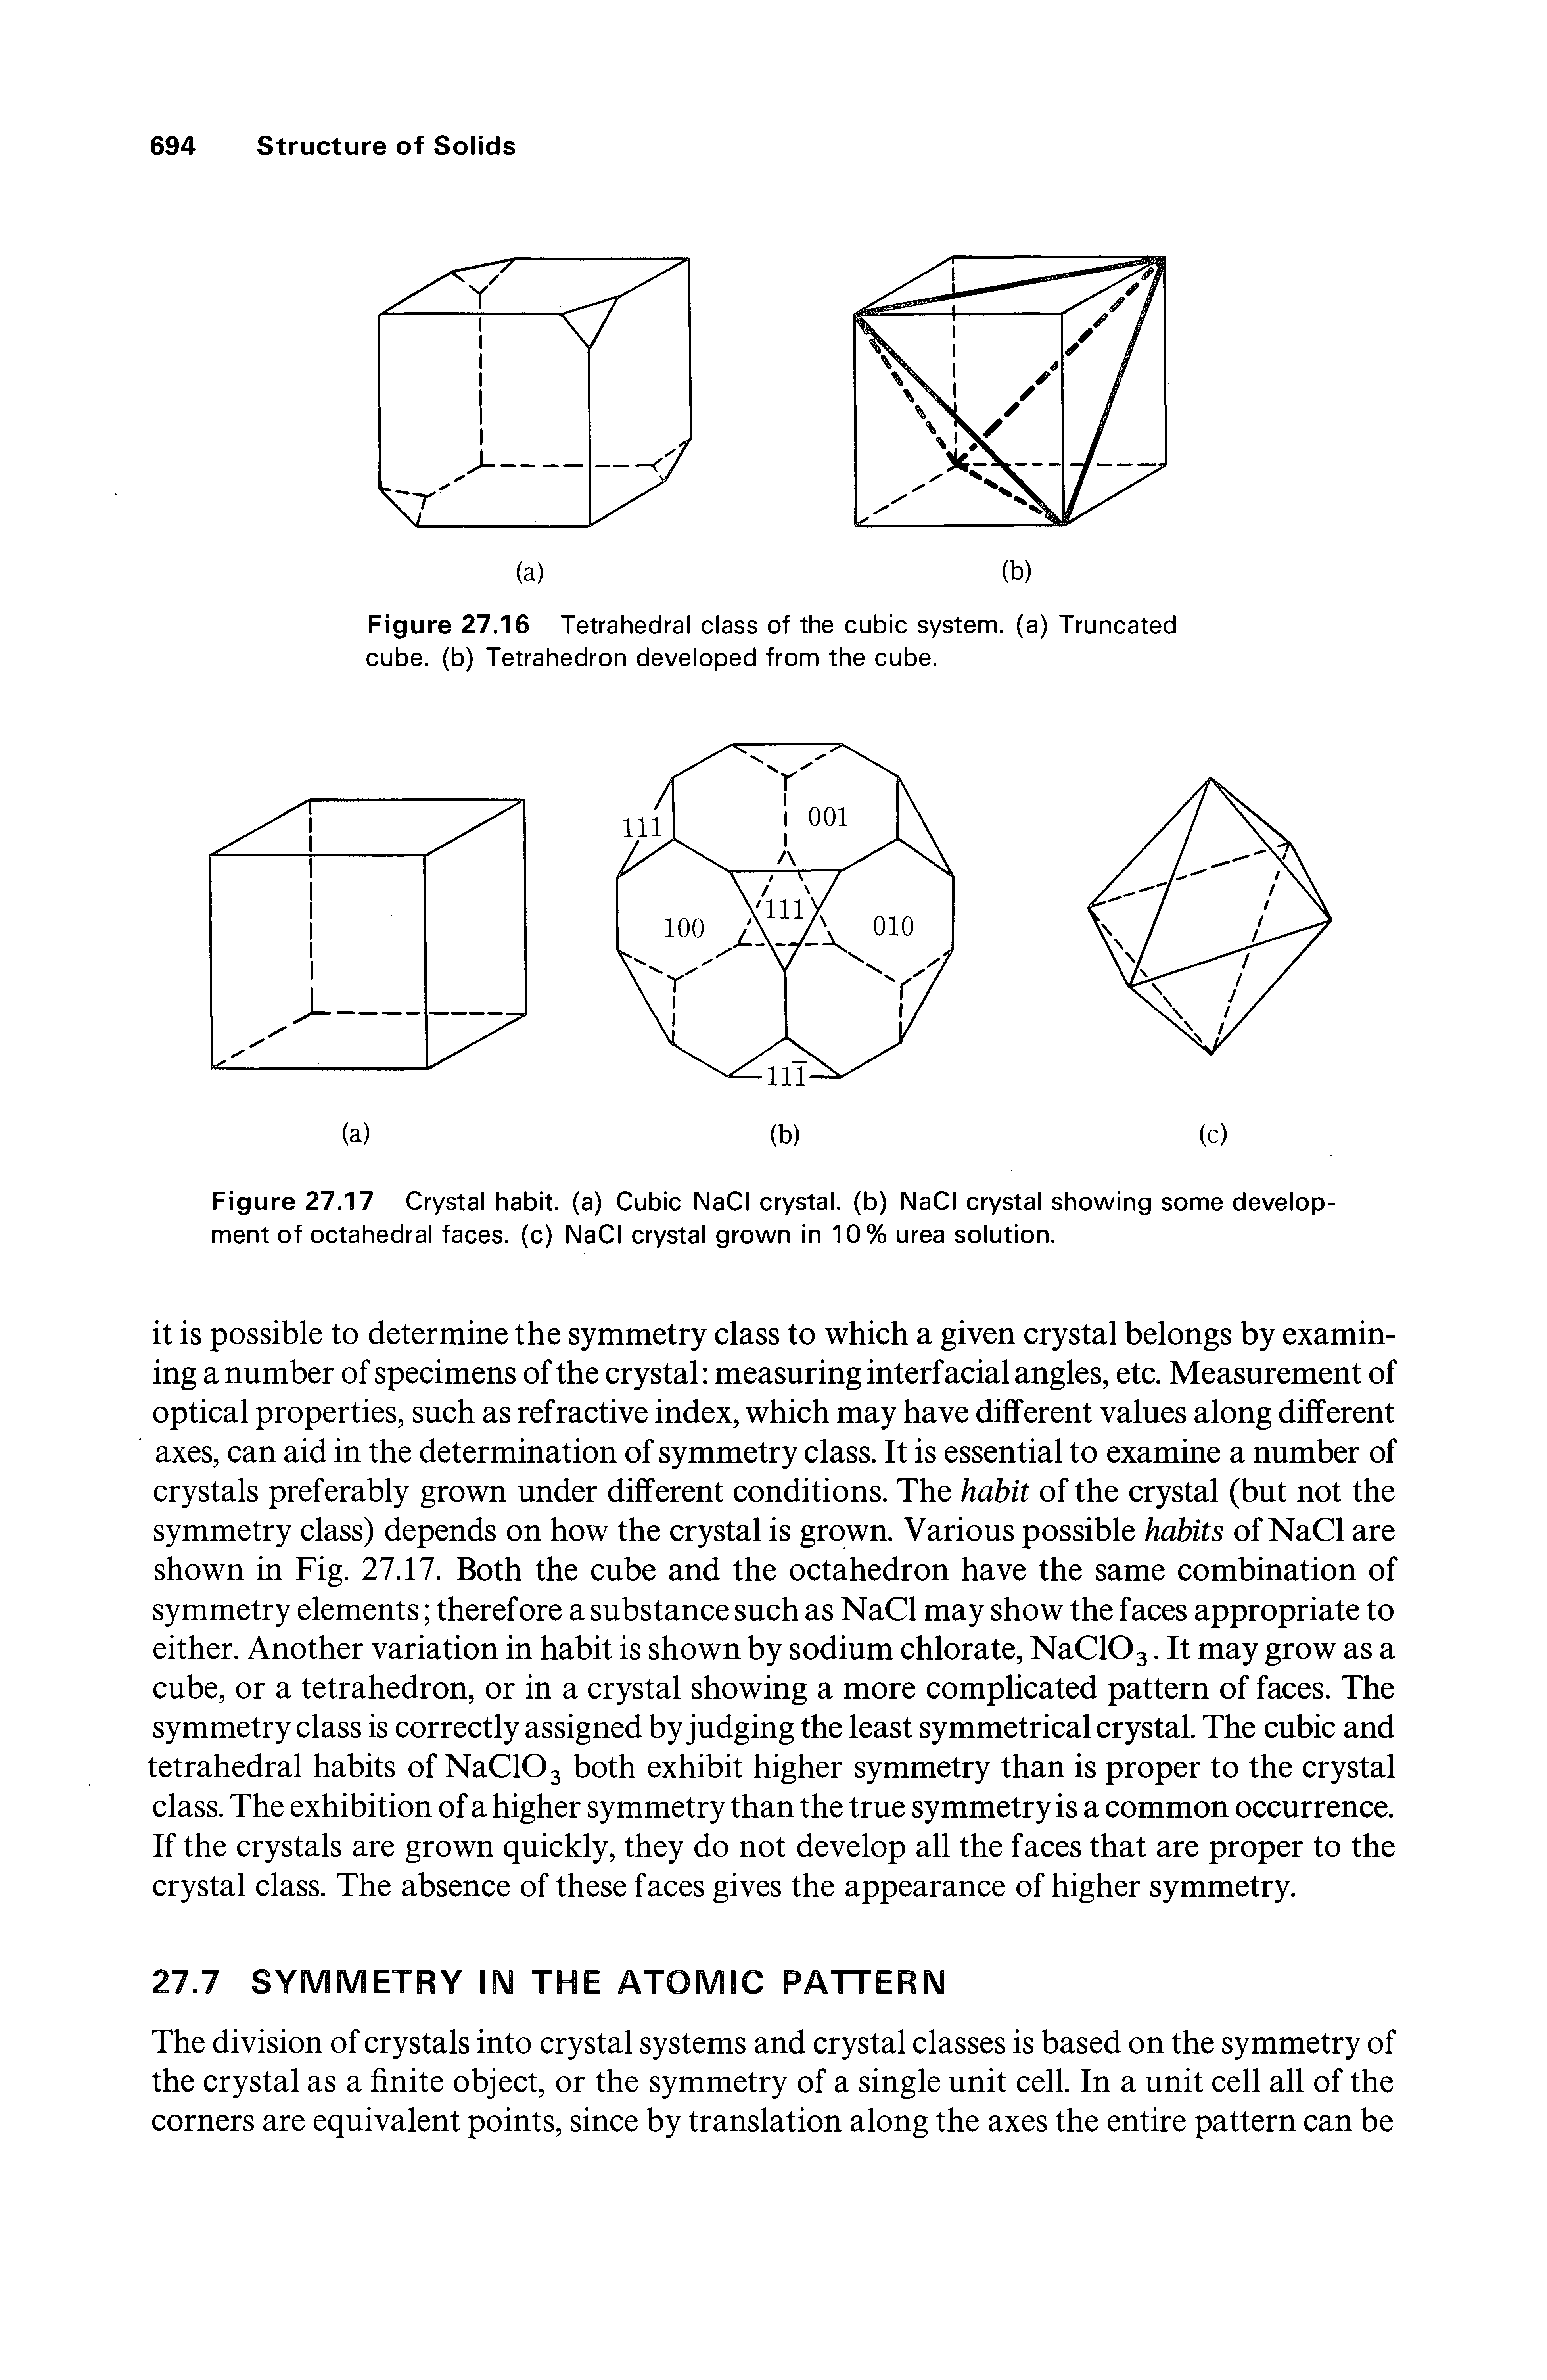 Figure 27.16 Tetrahedral class of the cubic system, (a) Truncated cube, (b) Tetrahedron developed from the cube.